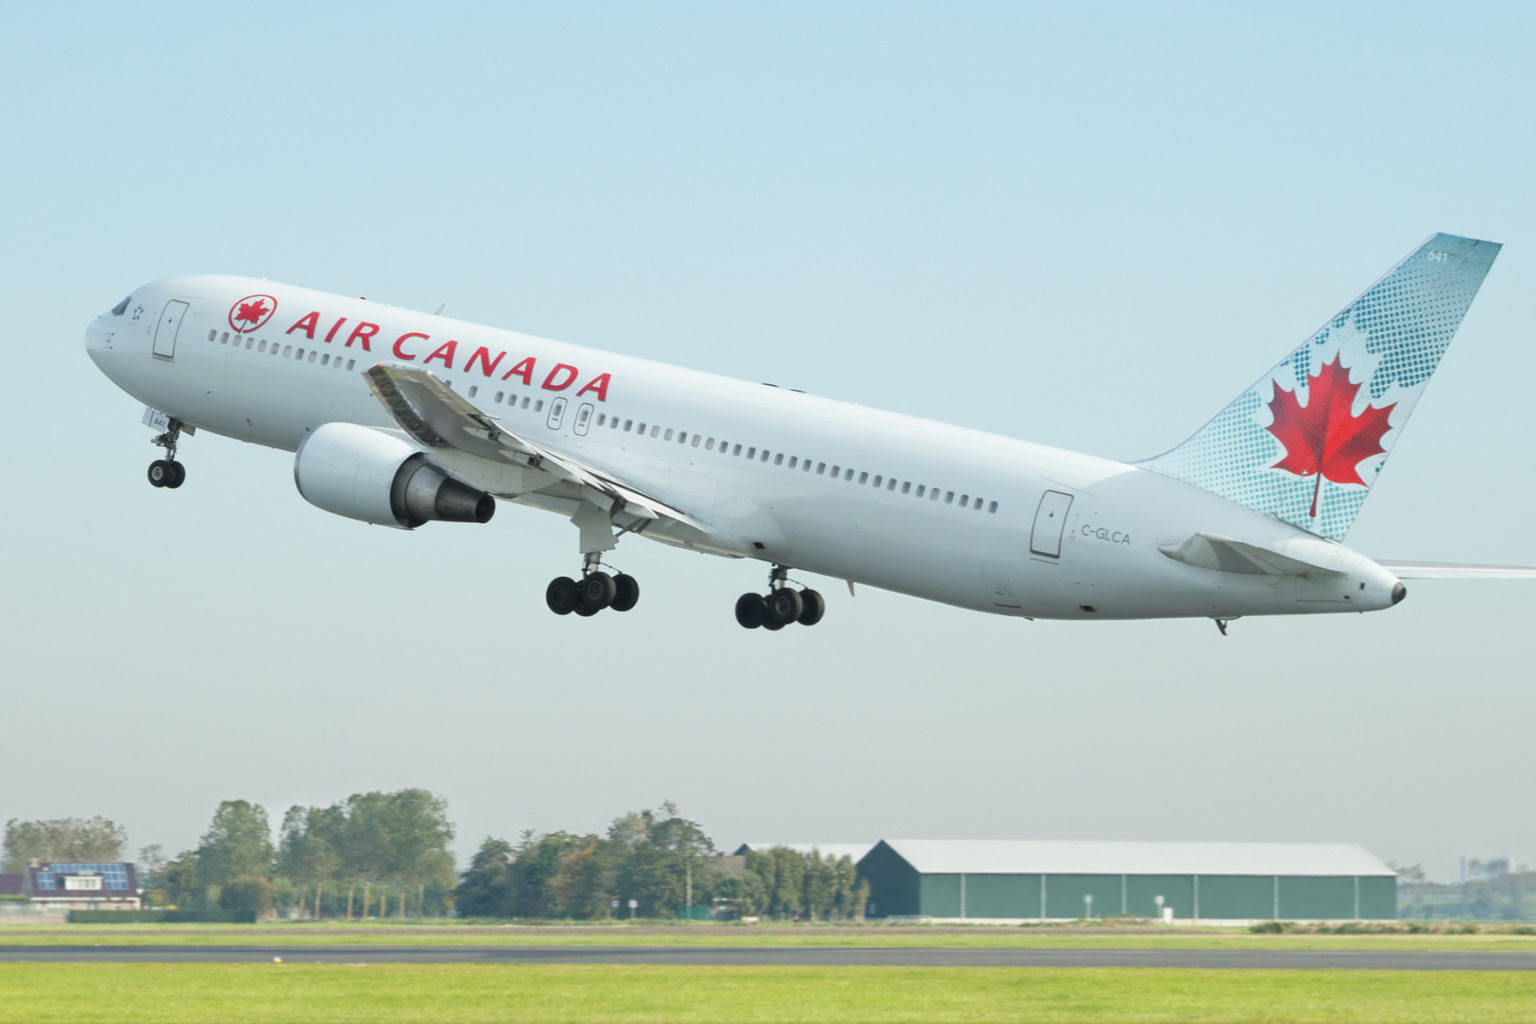 Ready to takeoff! Air Canada to operate flights to 97 destinations